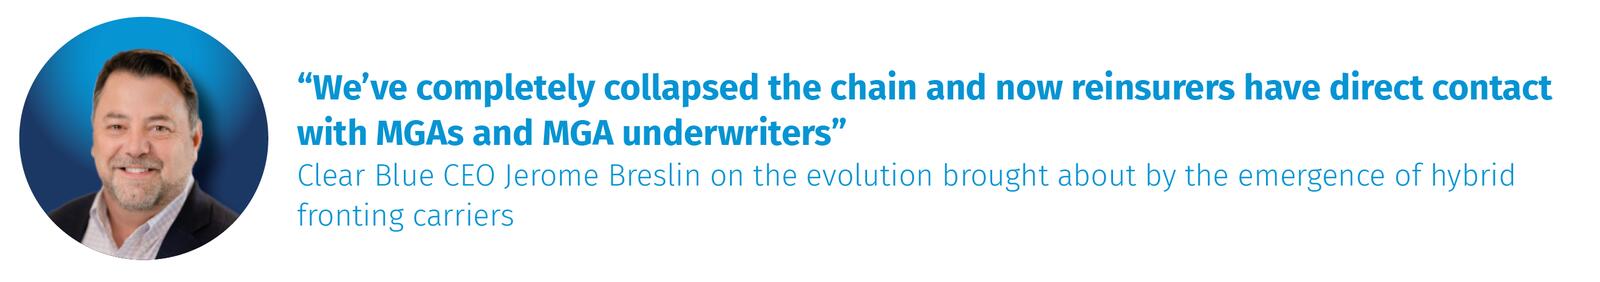 Clear Blue CEO Jerome Breslin on the evolution brought about by the emergence of hybrid fronting carriers